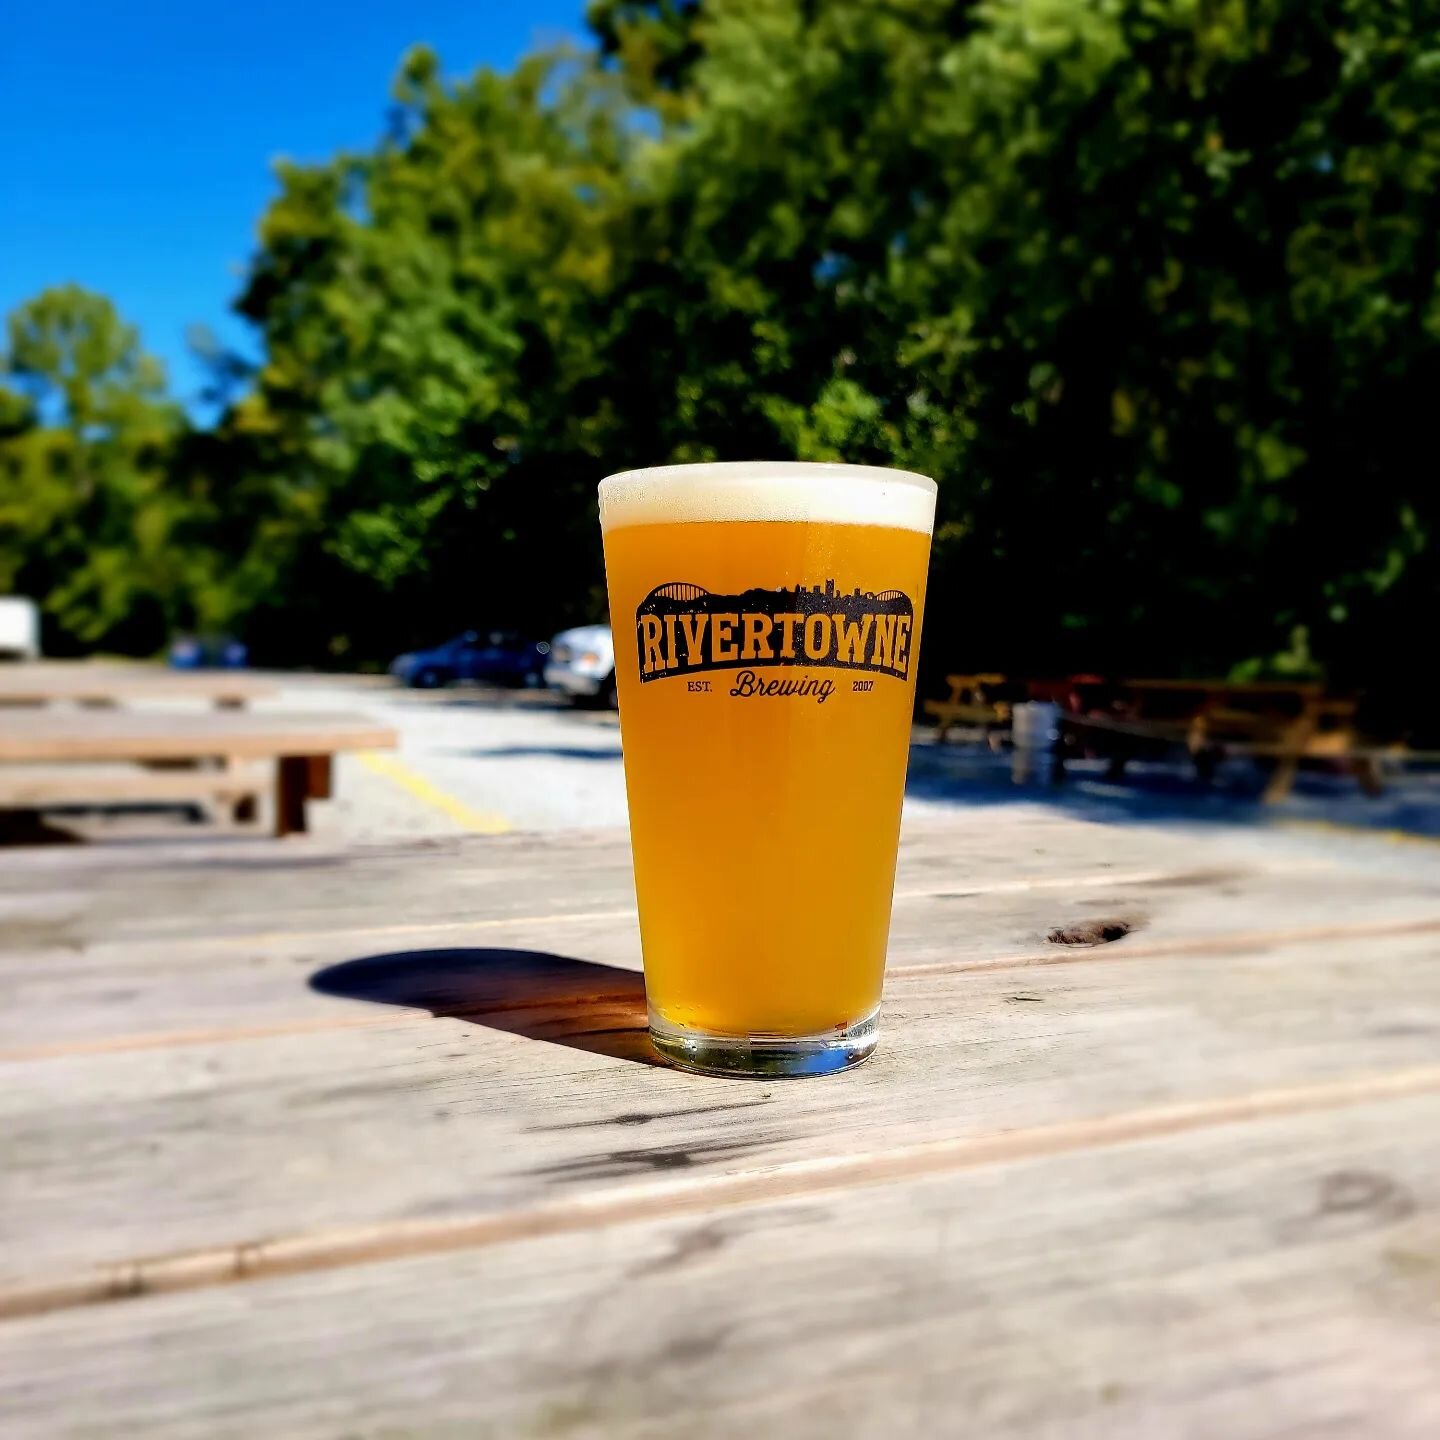 Hazy Morning, our Flagship Hazy IPA, is back!

Brewed with Citra &amp; Cascade hops, enjoy flavors of tangerine zest and grapefruit with every sip! 

Copious amounts of wheat and oats are used to create a soft, white, pillowy head and medium body tha